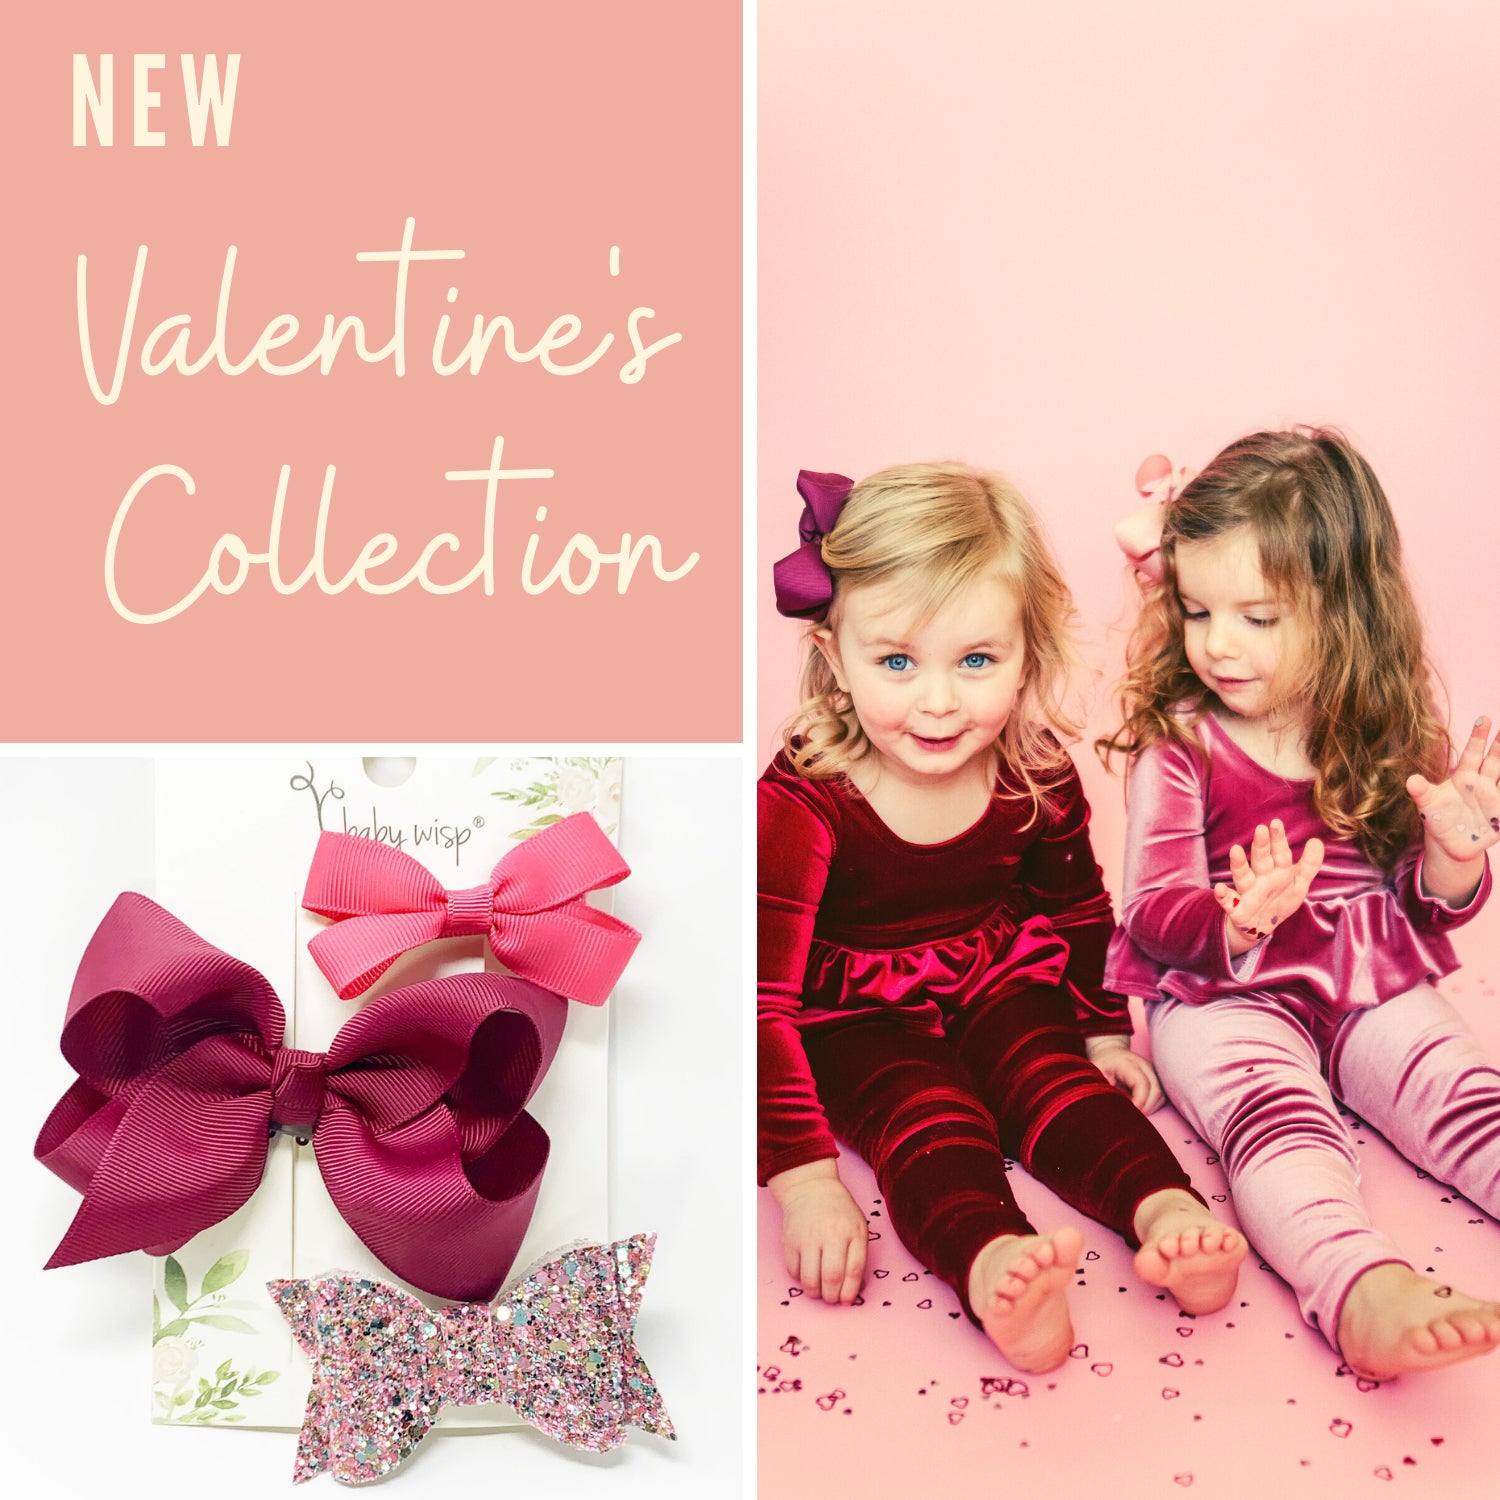 The Valentine's Shop is Now Open!